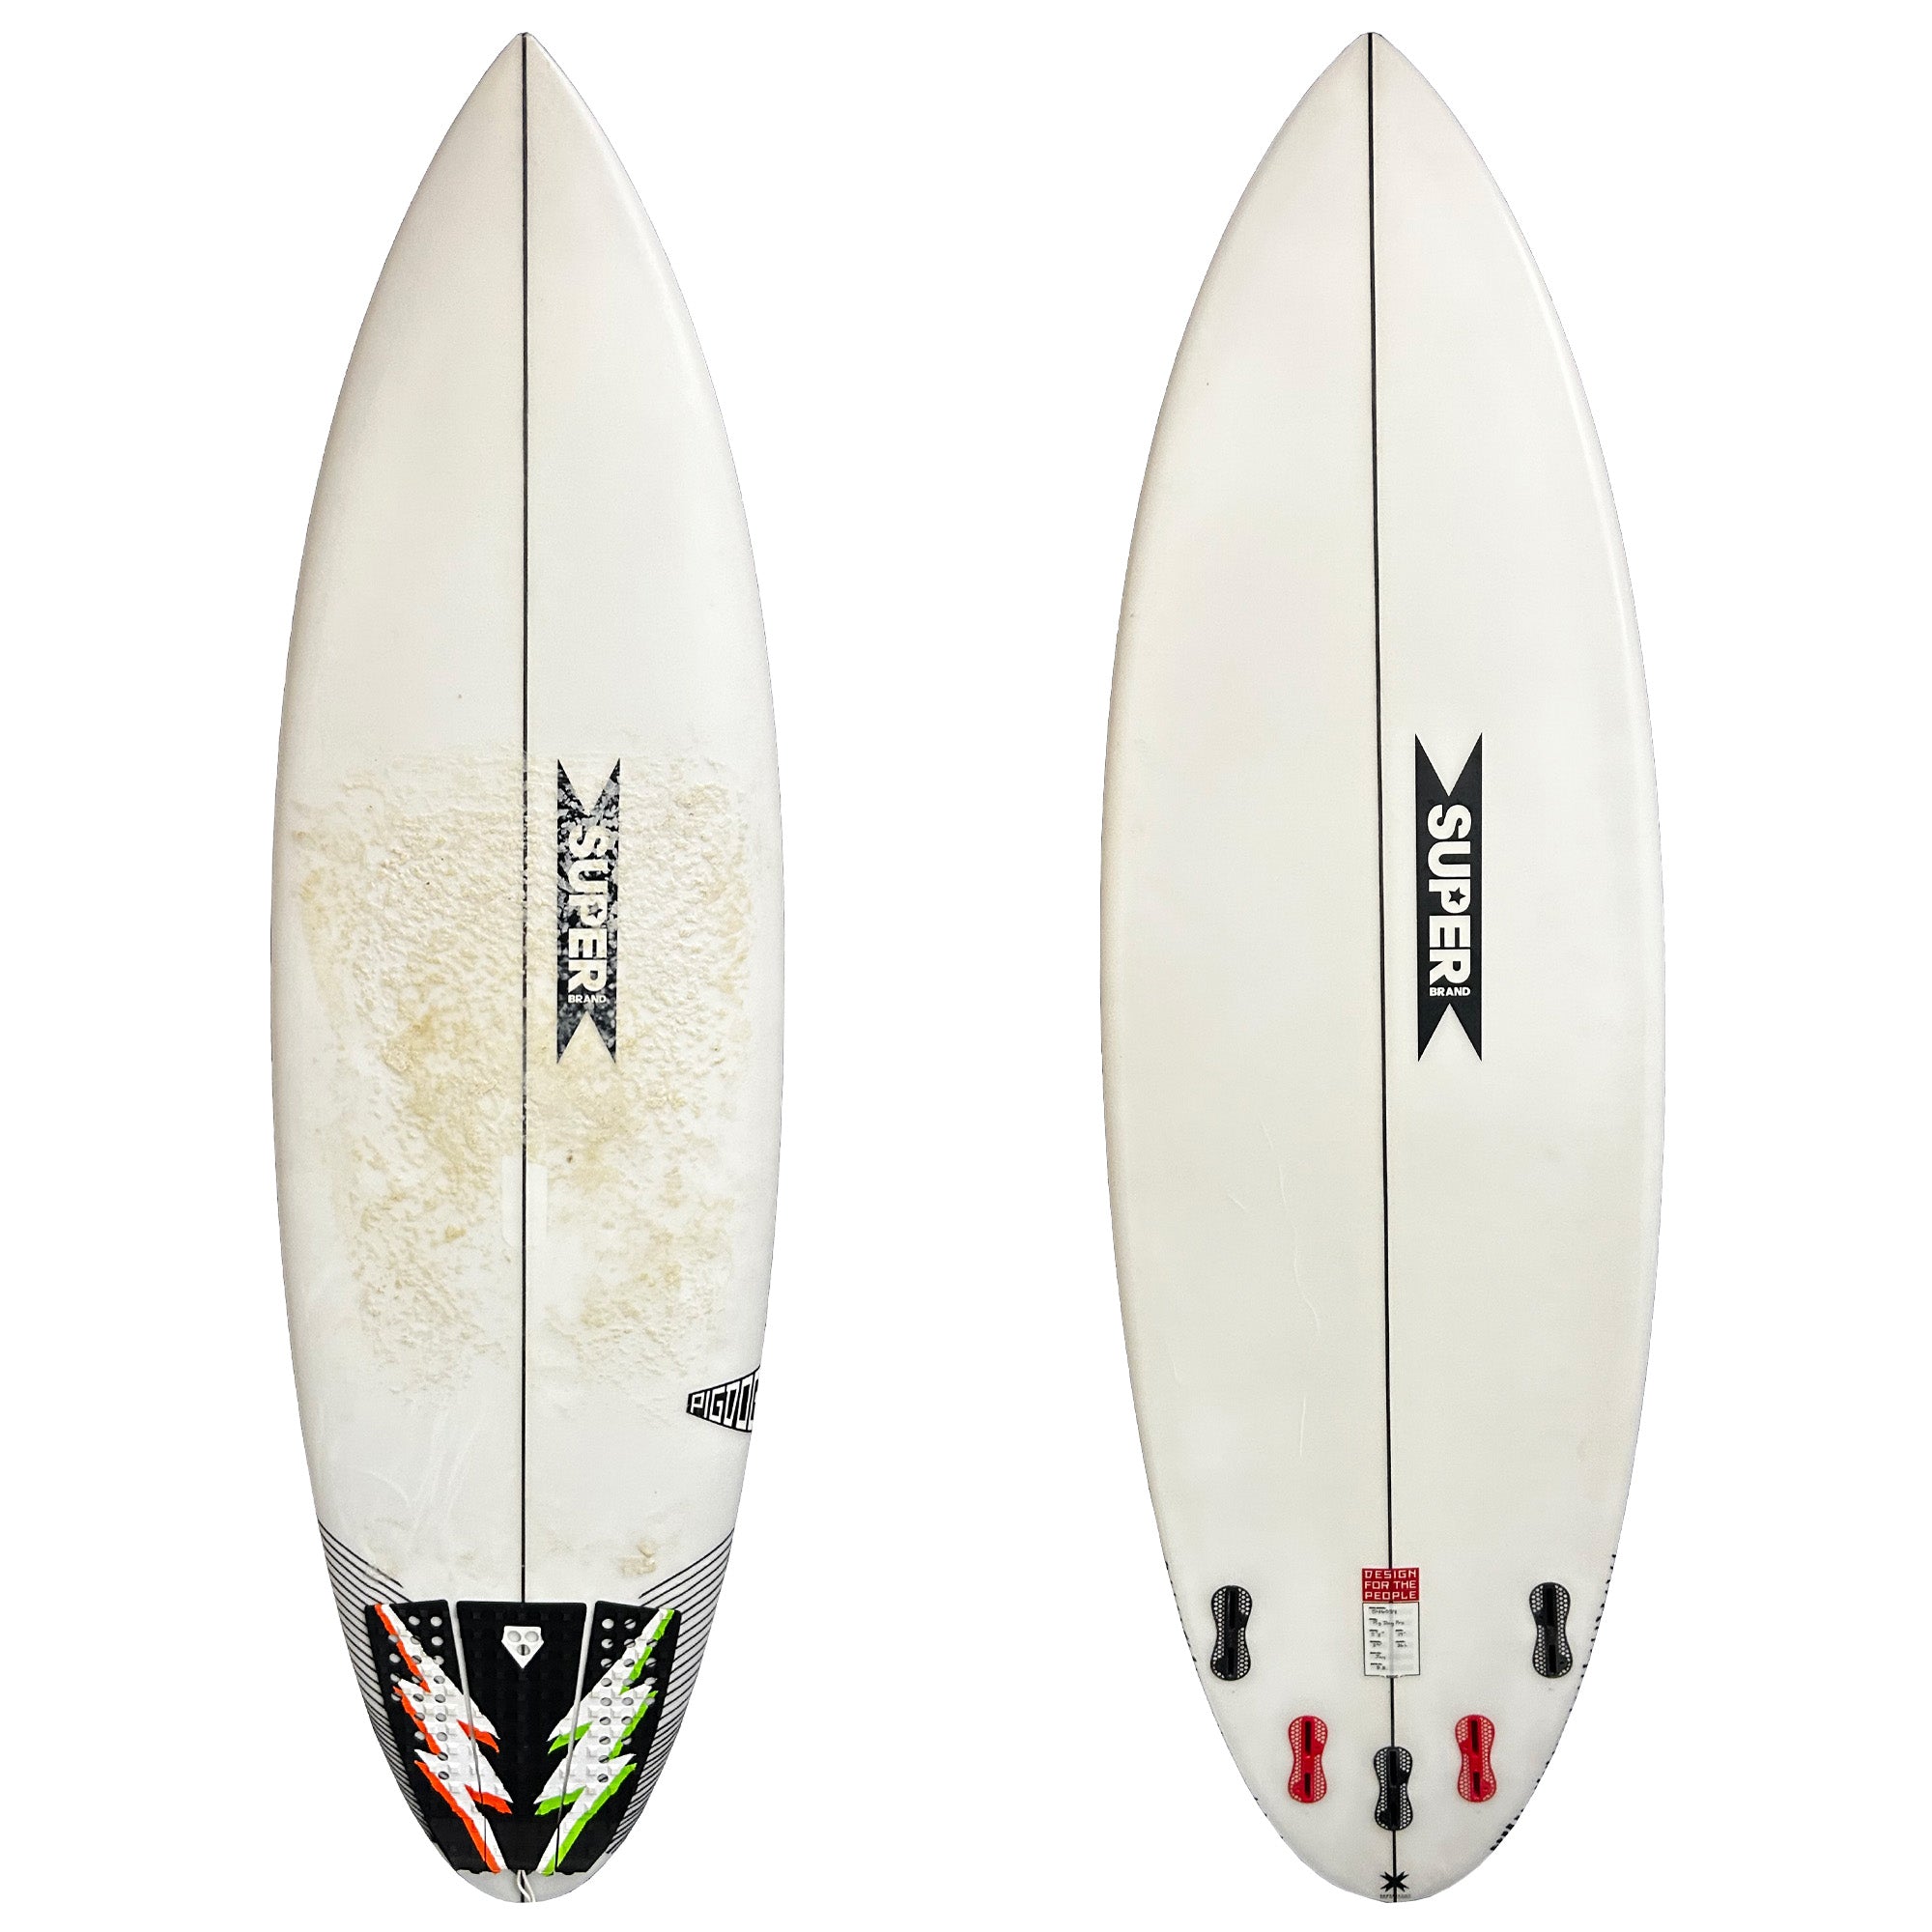 Super Brand Pig Dog Pro 5'8 Consignment Surfboard